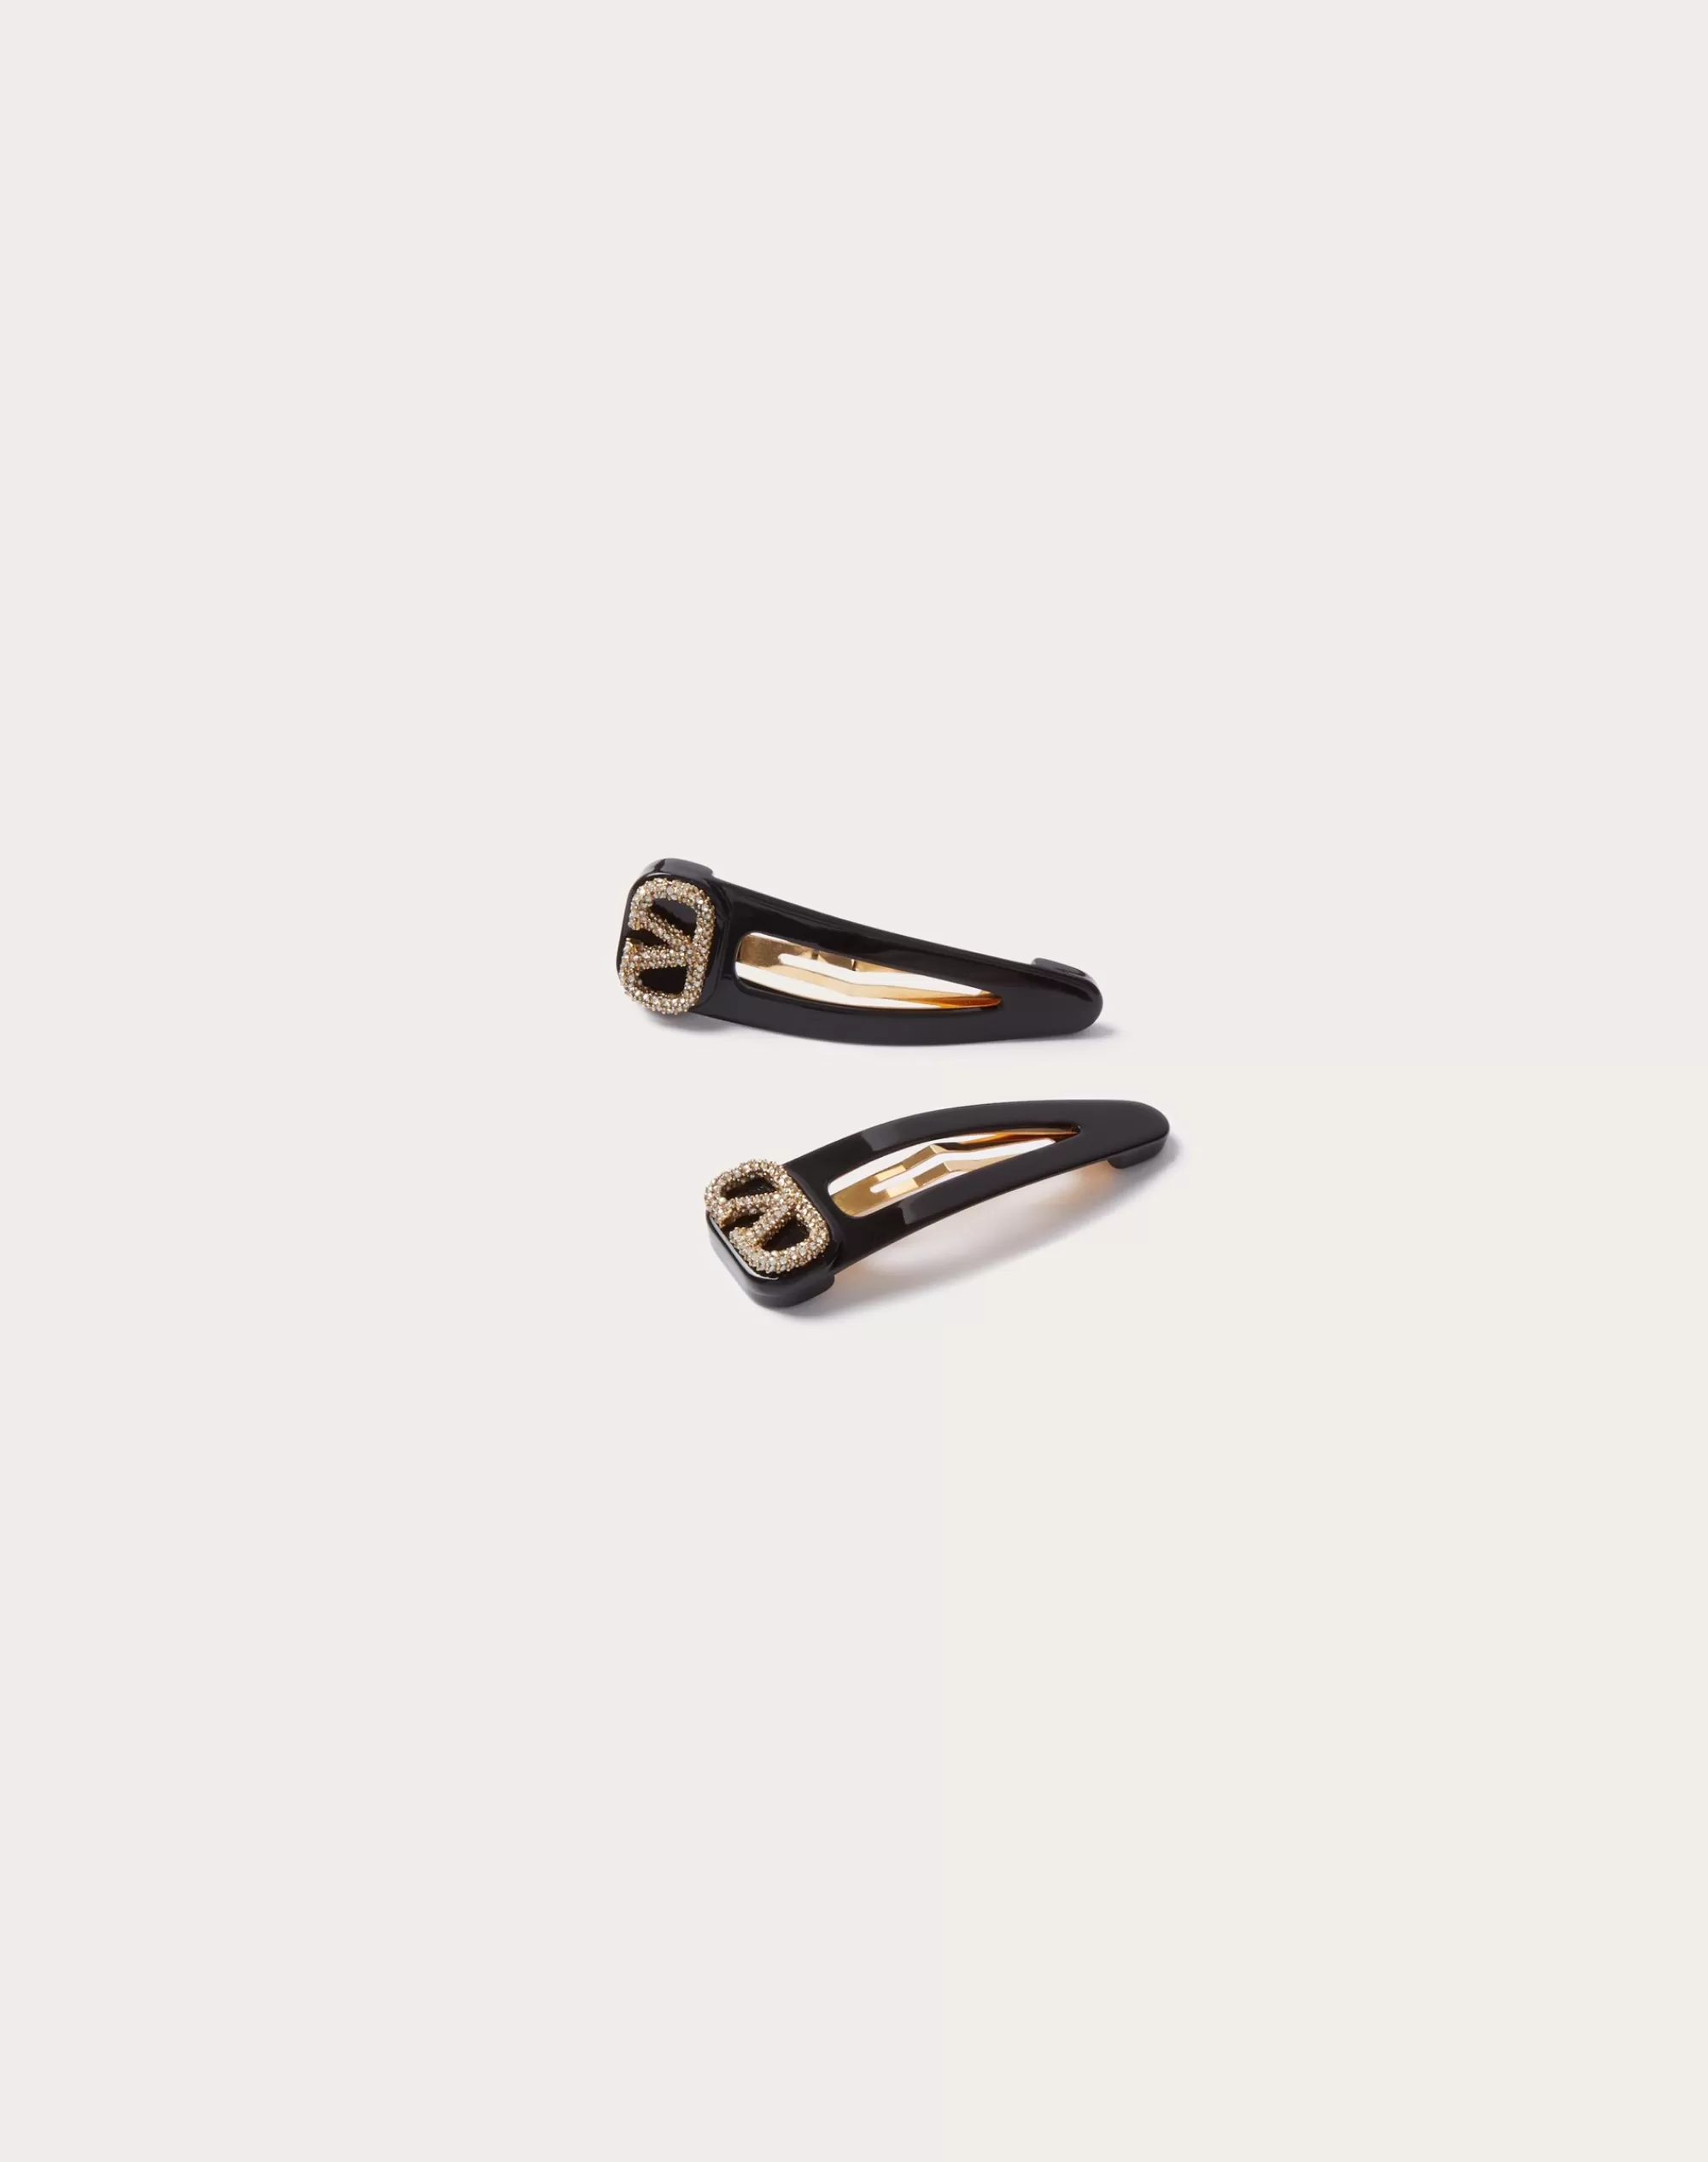 Valentino VLOGO SIGNATURE METAL AND RESIN HAIR CLIPS WITH SWAROVSKI® CRYSTALS Black/gold/crystal New